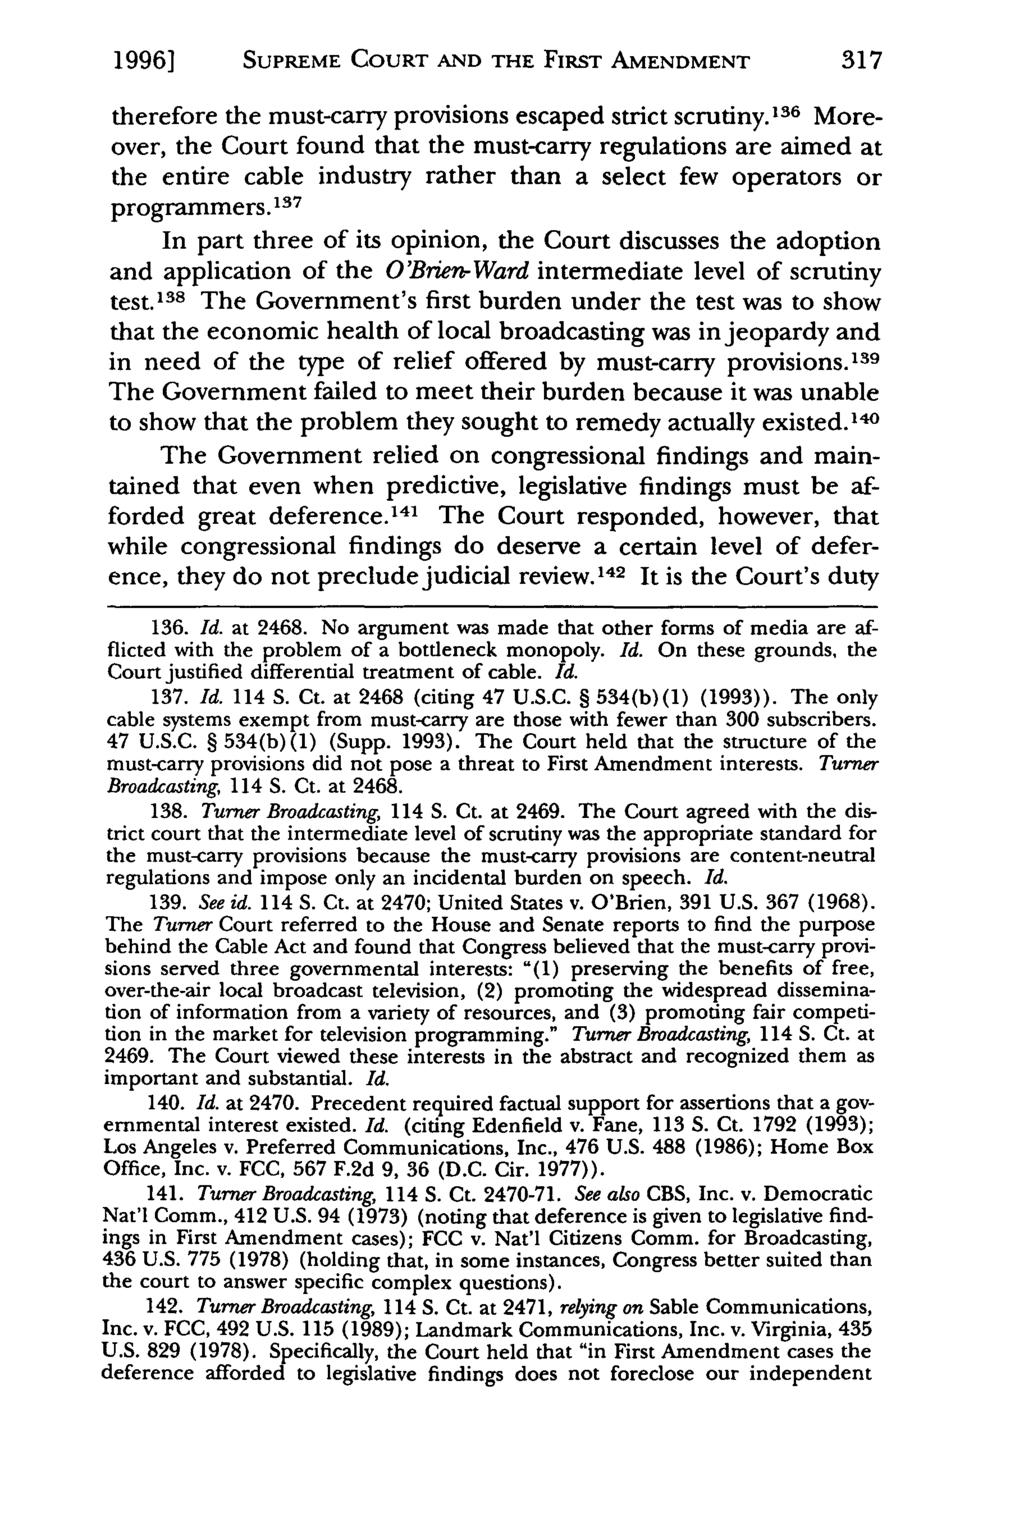 1996] Sands: SUPREME The Supreme COURT Court Turns AND Its THE Back on FIRST the First AMENDMENT Amendment, the 1992 317 therefore the must-carry provisions escaped strict scrutiny.